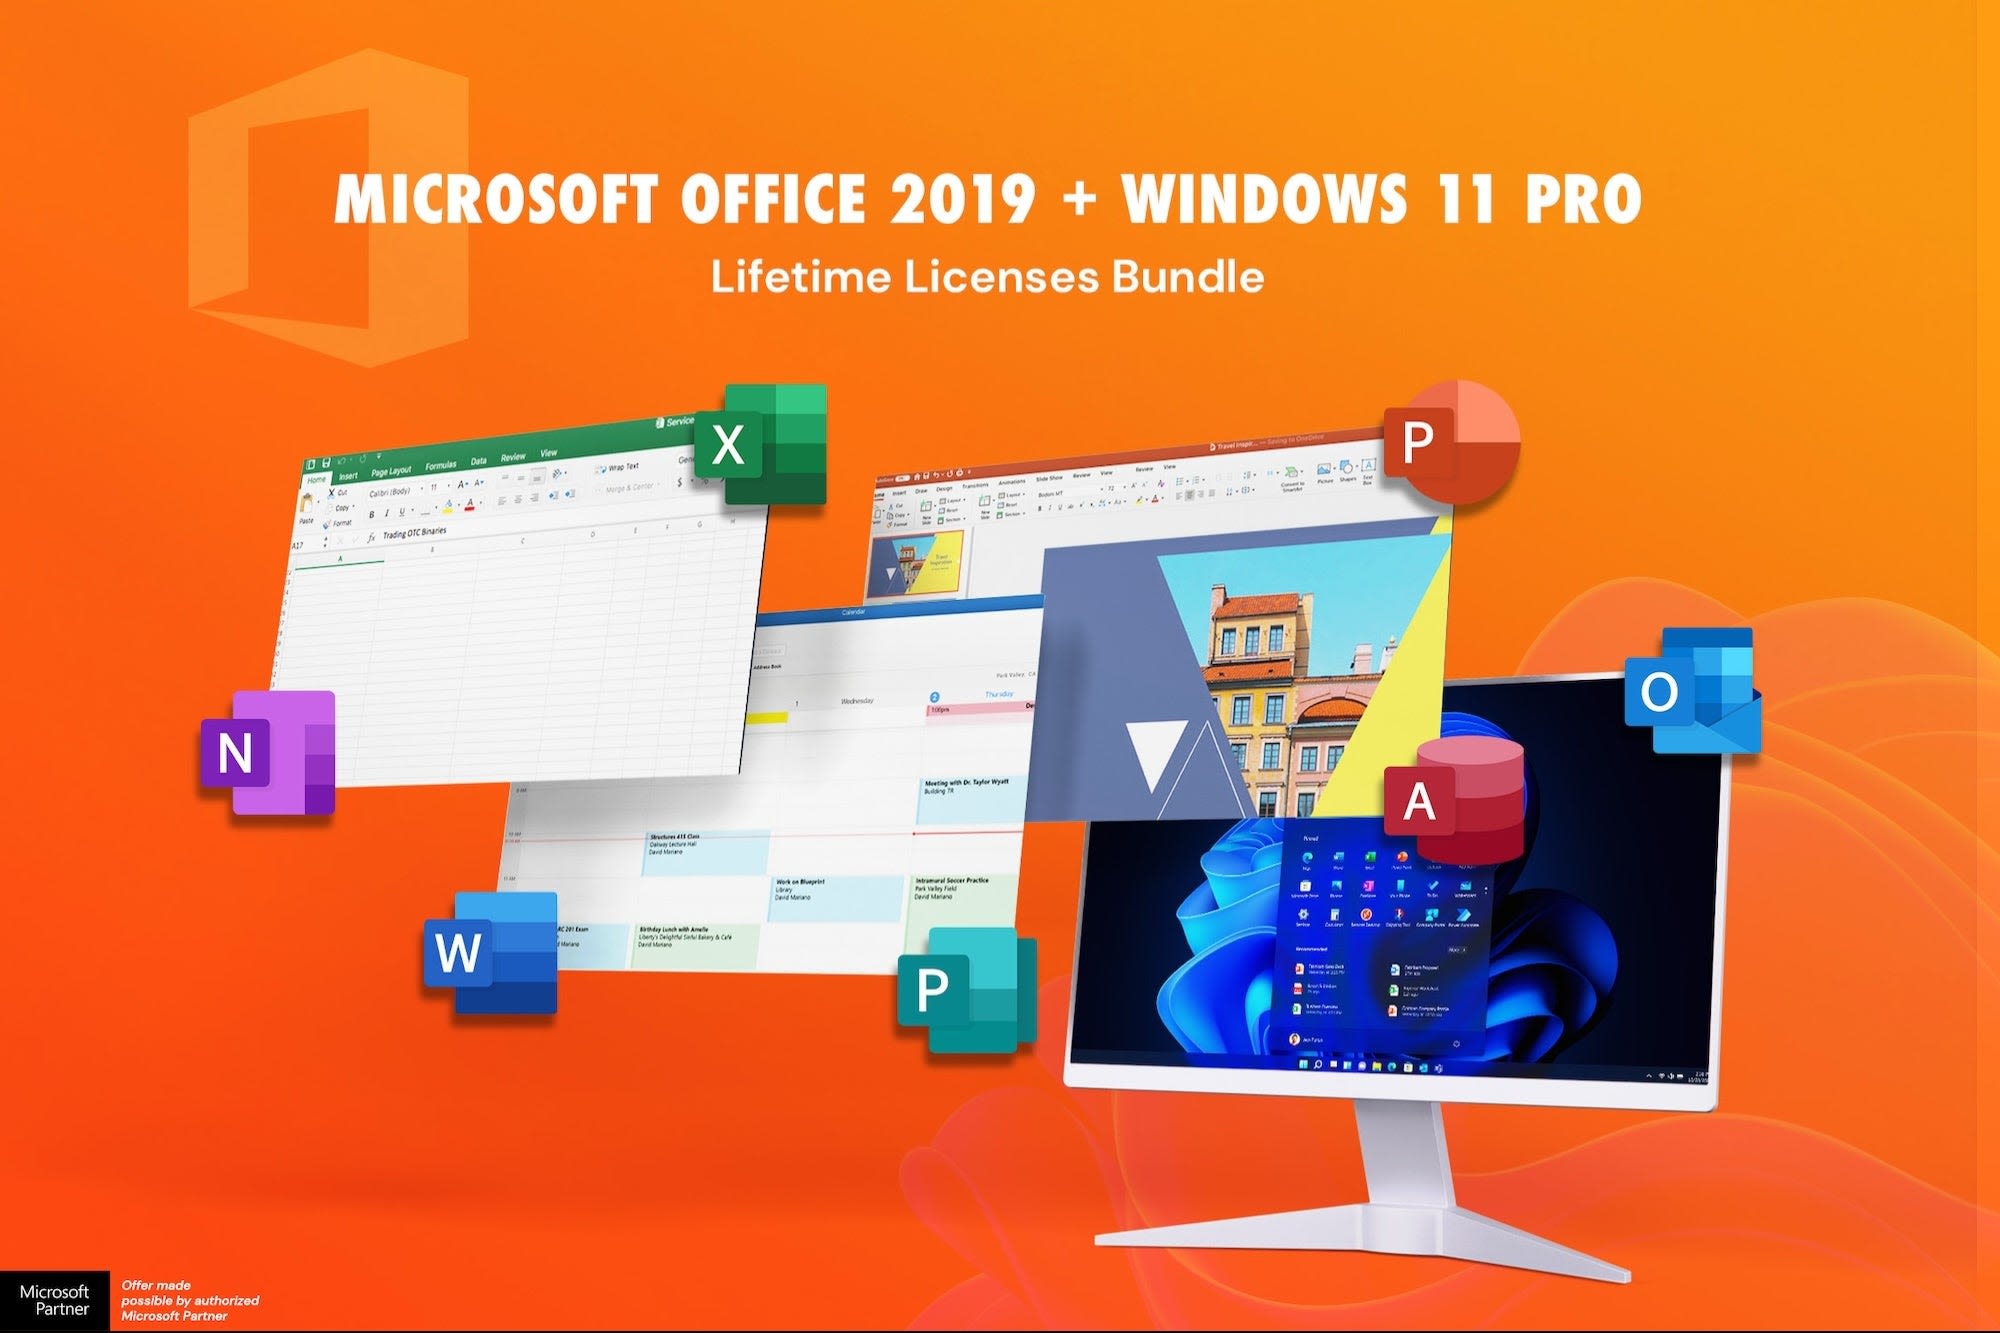 Get Microsoft Office Pro 2019 and Windows 11 Pro for Only $50 Through May 5 | Entrepreneur